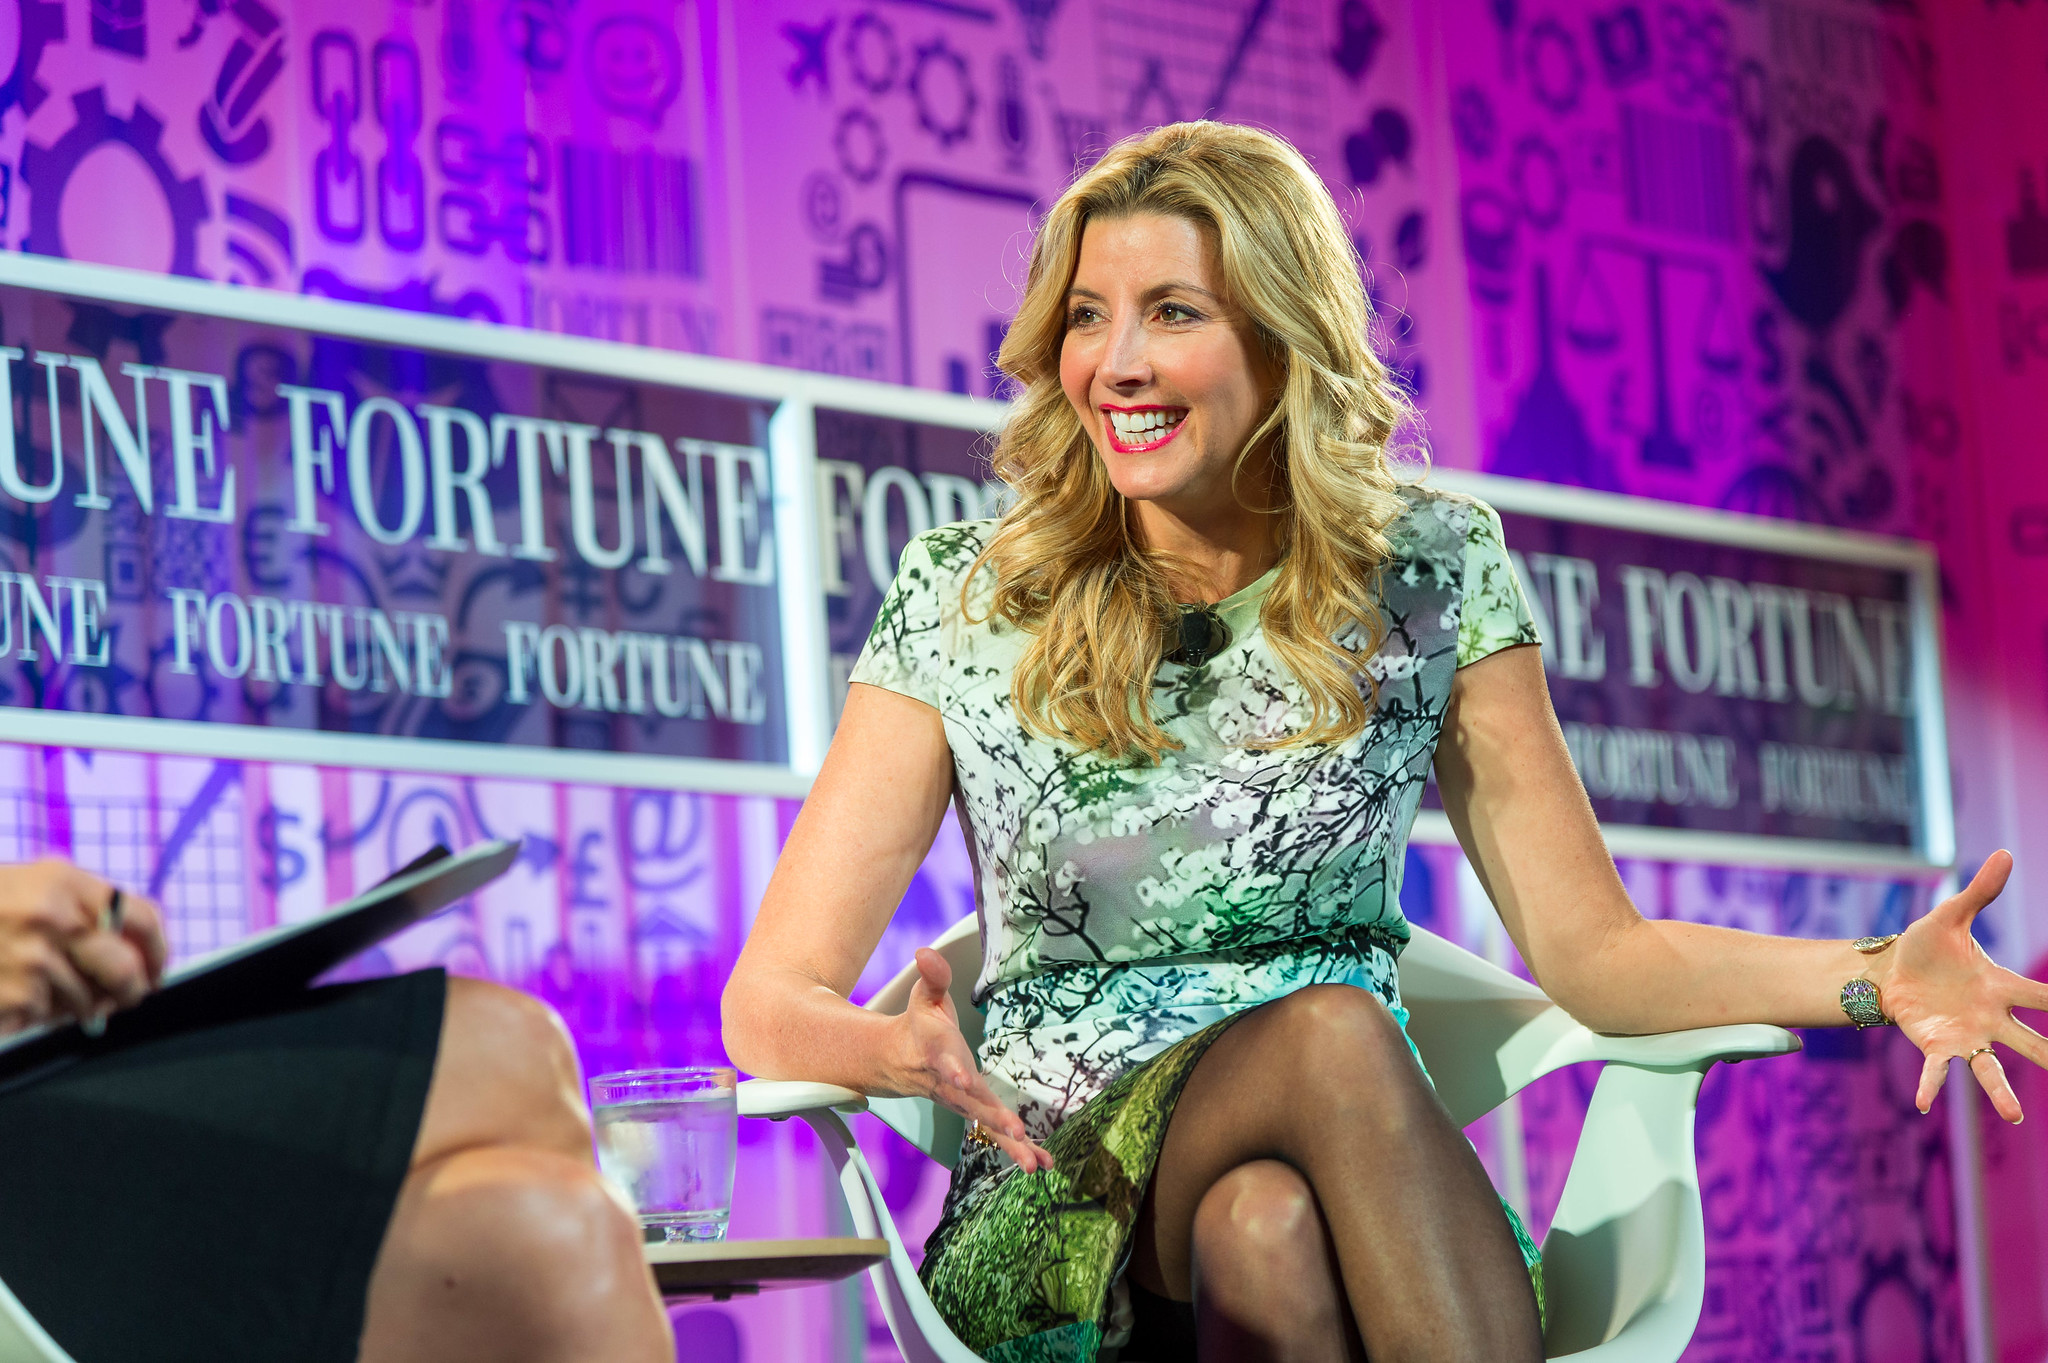 Billionaire Spanx founder Sara Blakely gave her entrepreneur husband a  piece of advice she learned as a teenager to get him through his hardest  days